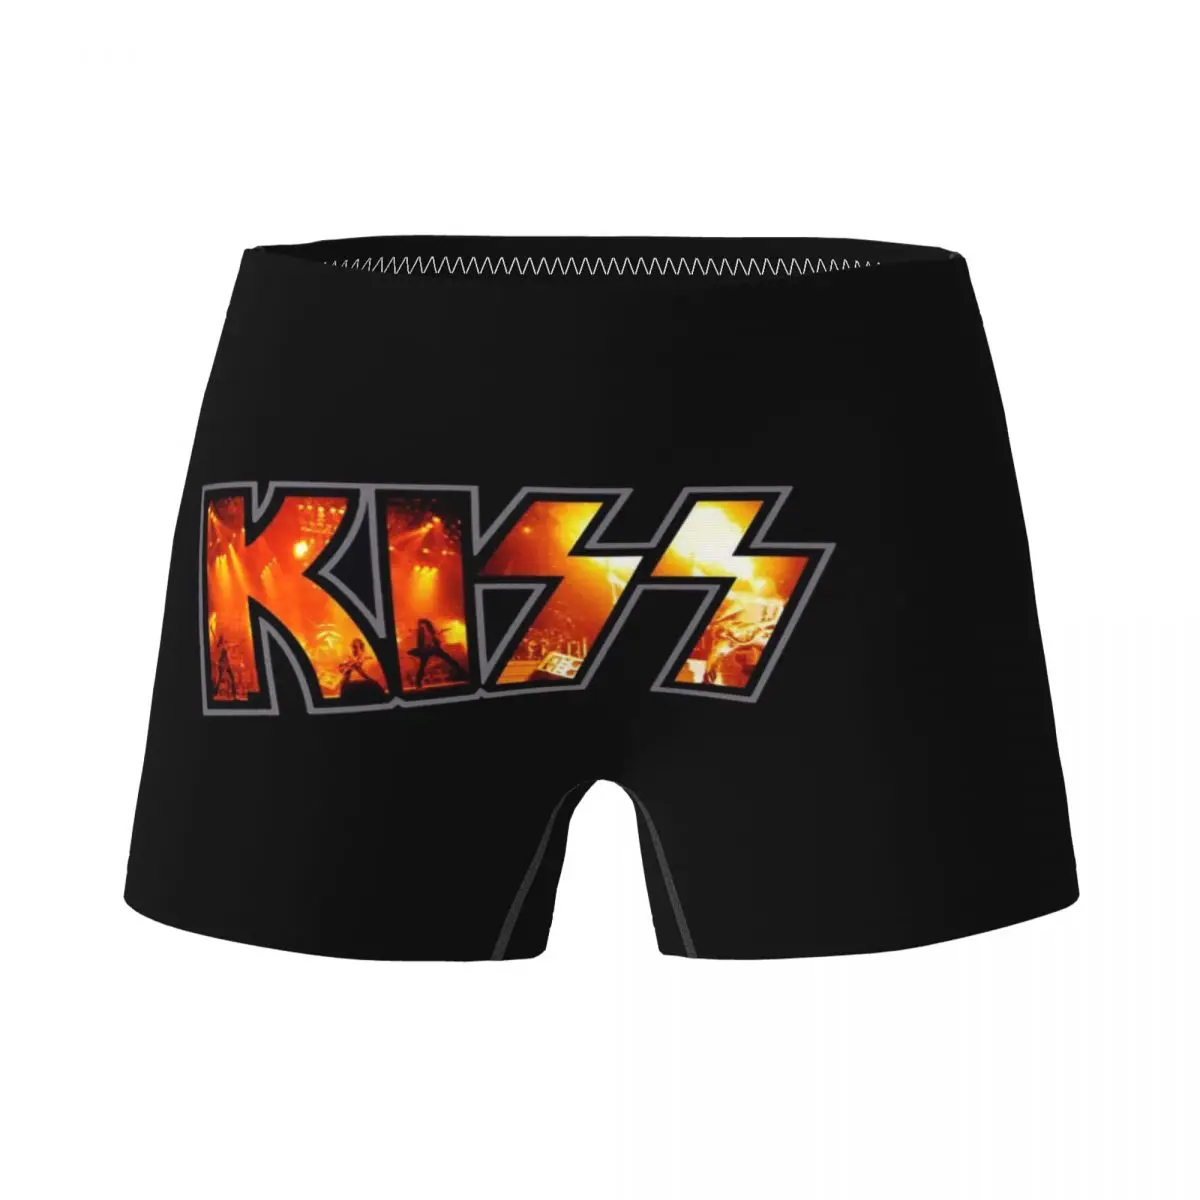 

Youth Girls Kiss Rock Band Boxers Children Pure Cotton Pretty Underwear Teenage Star Singer Underpants Soft Shorts Size 4T-15T